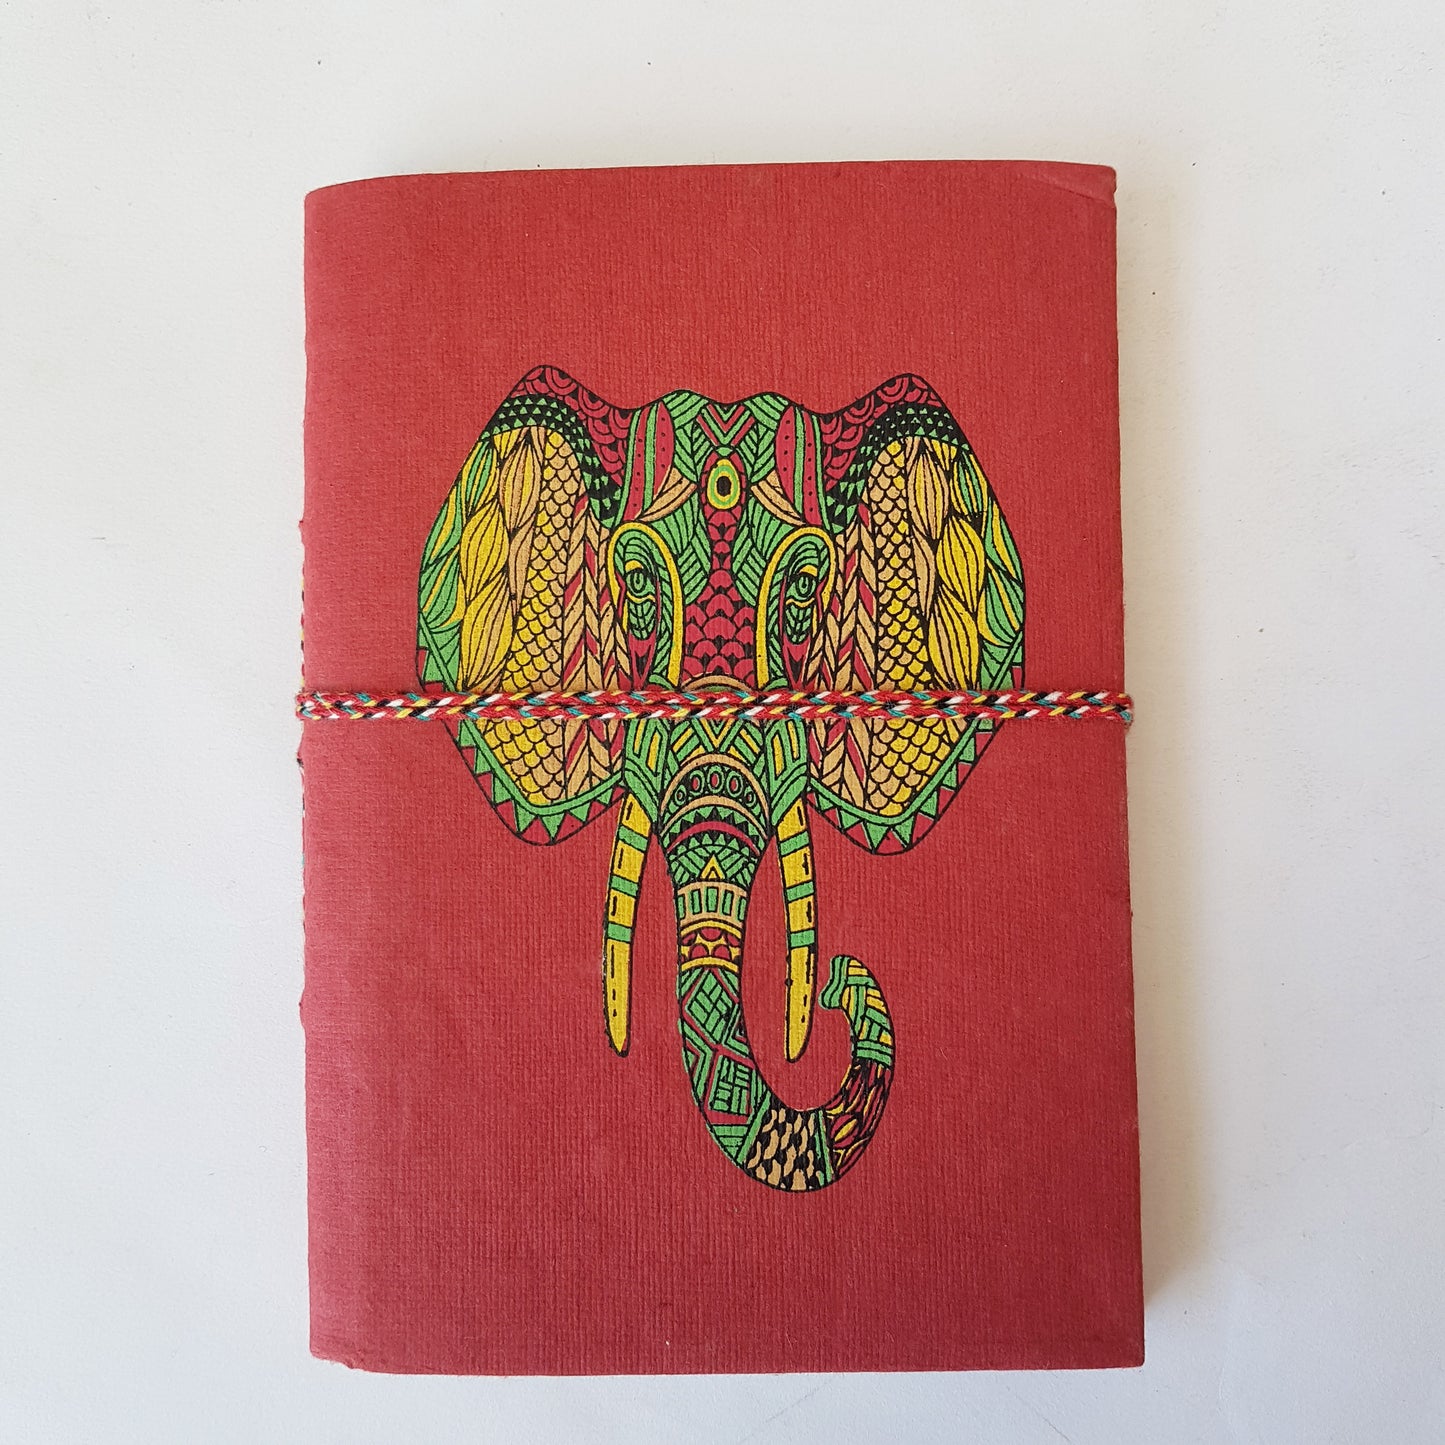 Elephant notebook journal 5x7 inches. Red hand bound hard cover lined diary with a colorful psychedelic elephant design. Free shipping CA & USA.